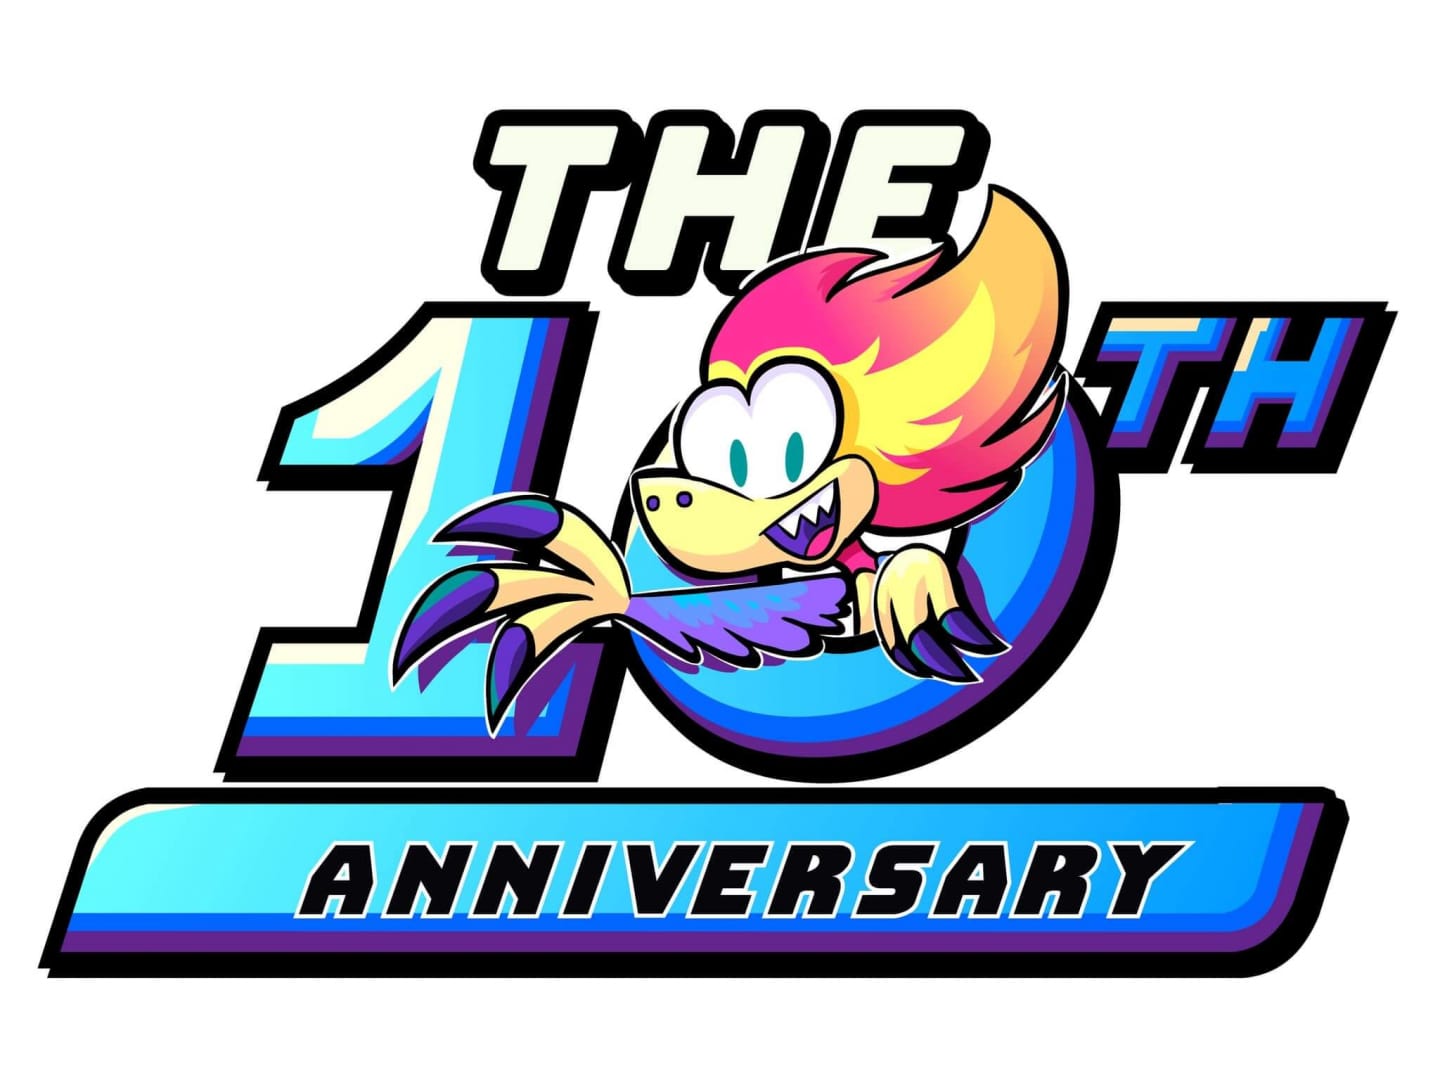 The 10th Anniversary logo for SGDQ, featuring their mascot Velocity the Raptor.